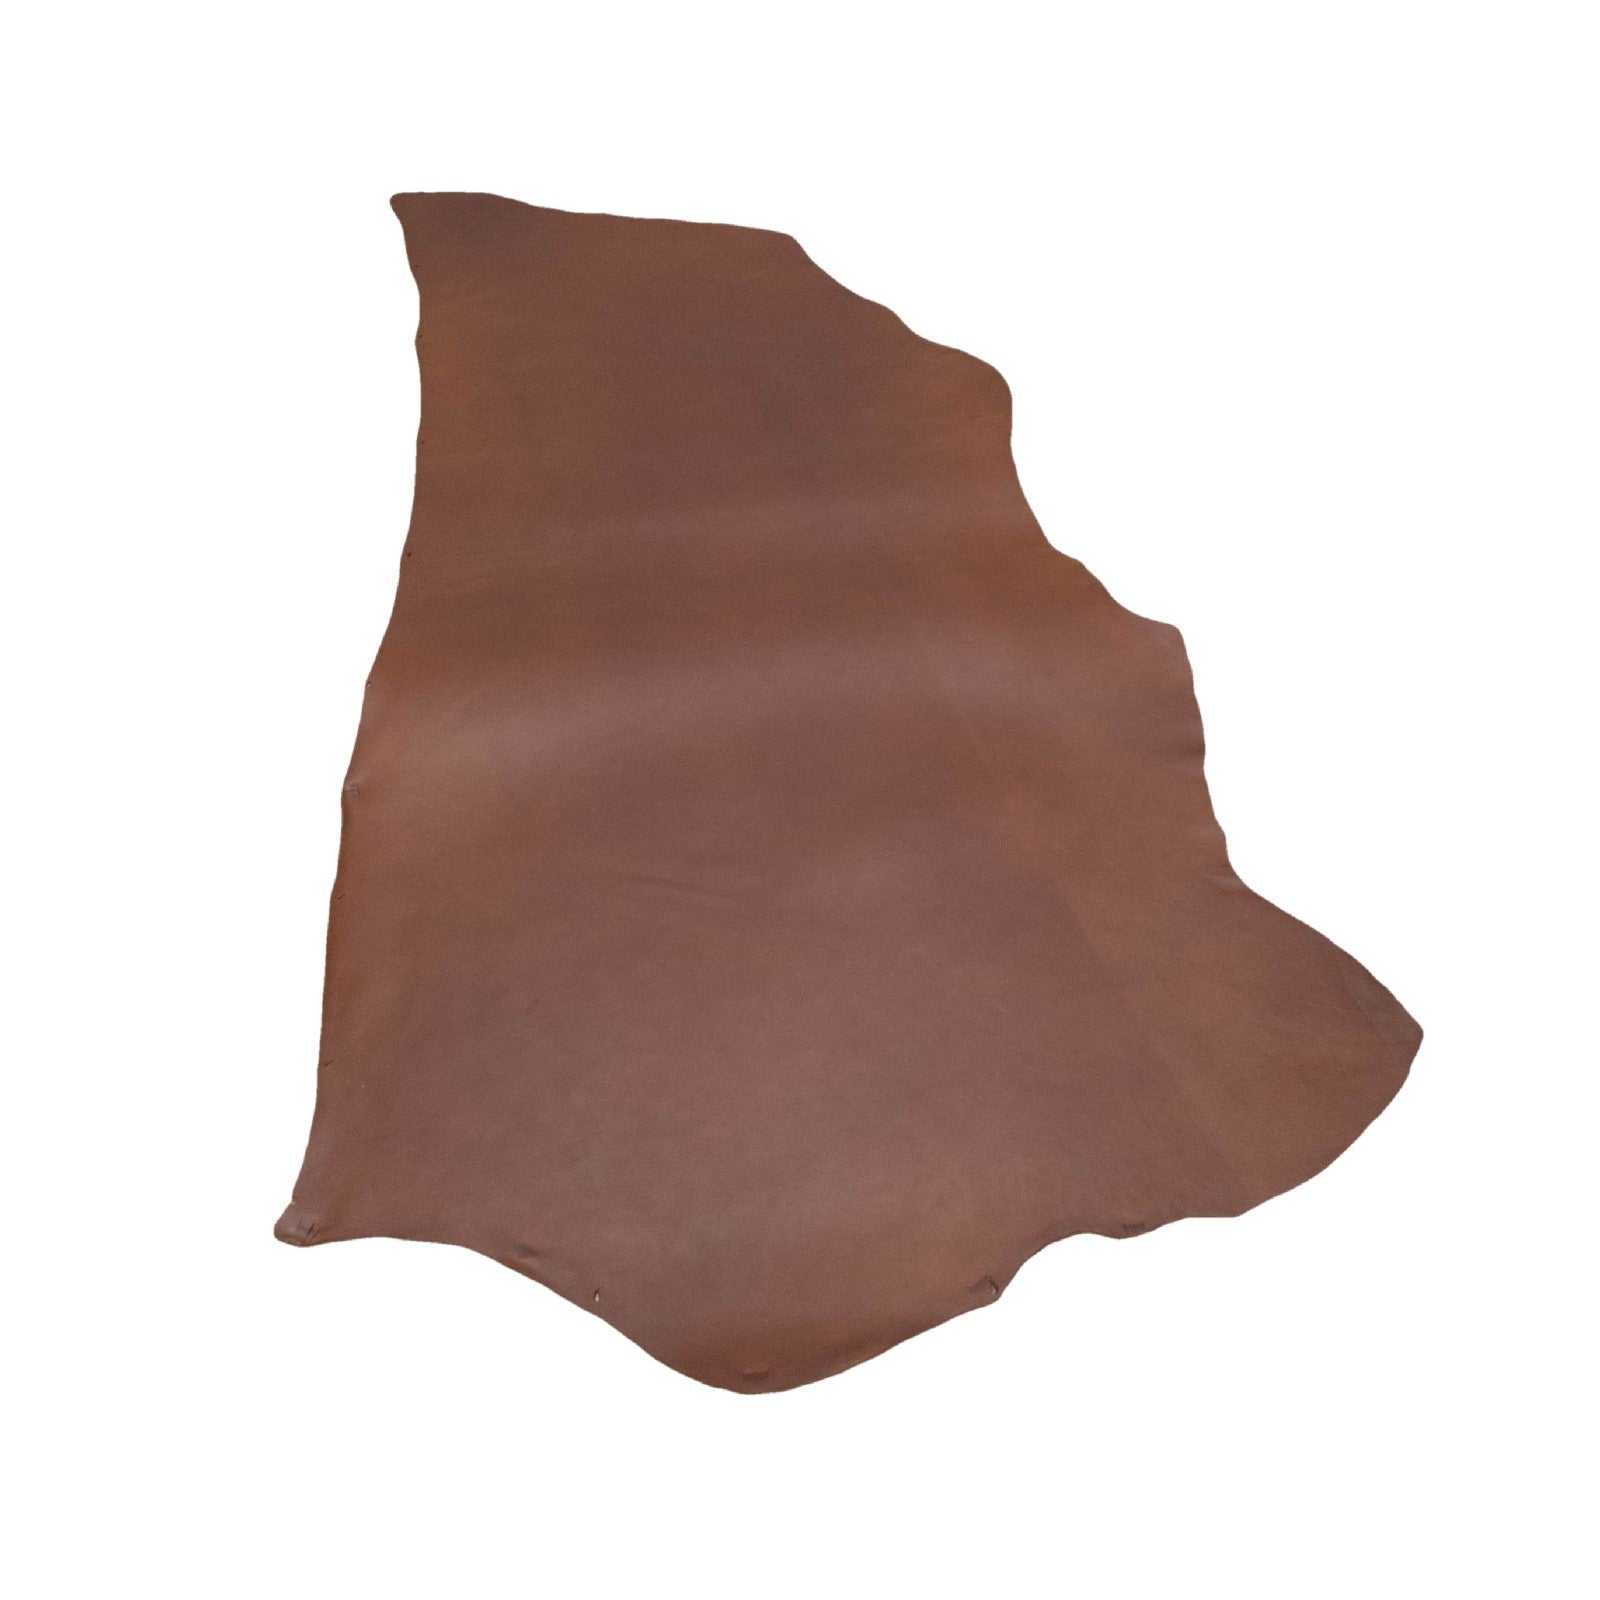 Pecan Brown, 9-10 oz, 6.5-7.5, 18-20 Sq Ft Sole Veg Tan Sides & Pieces, 18-20 / Side | The Leather Guy